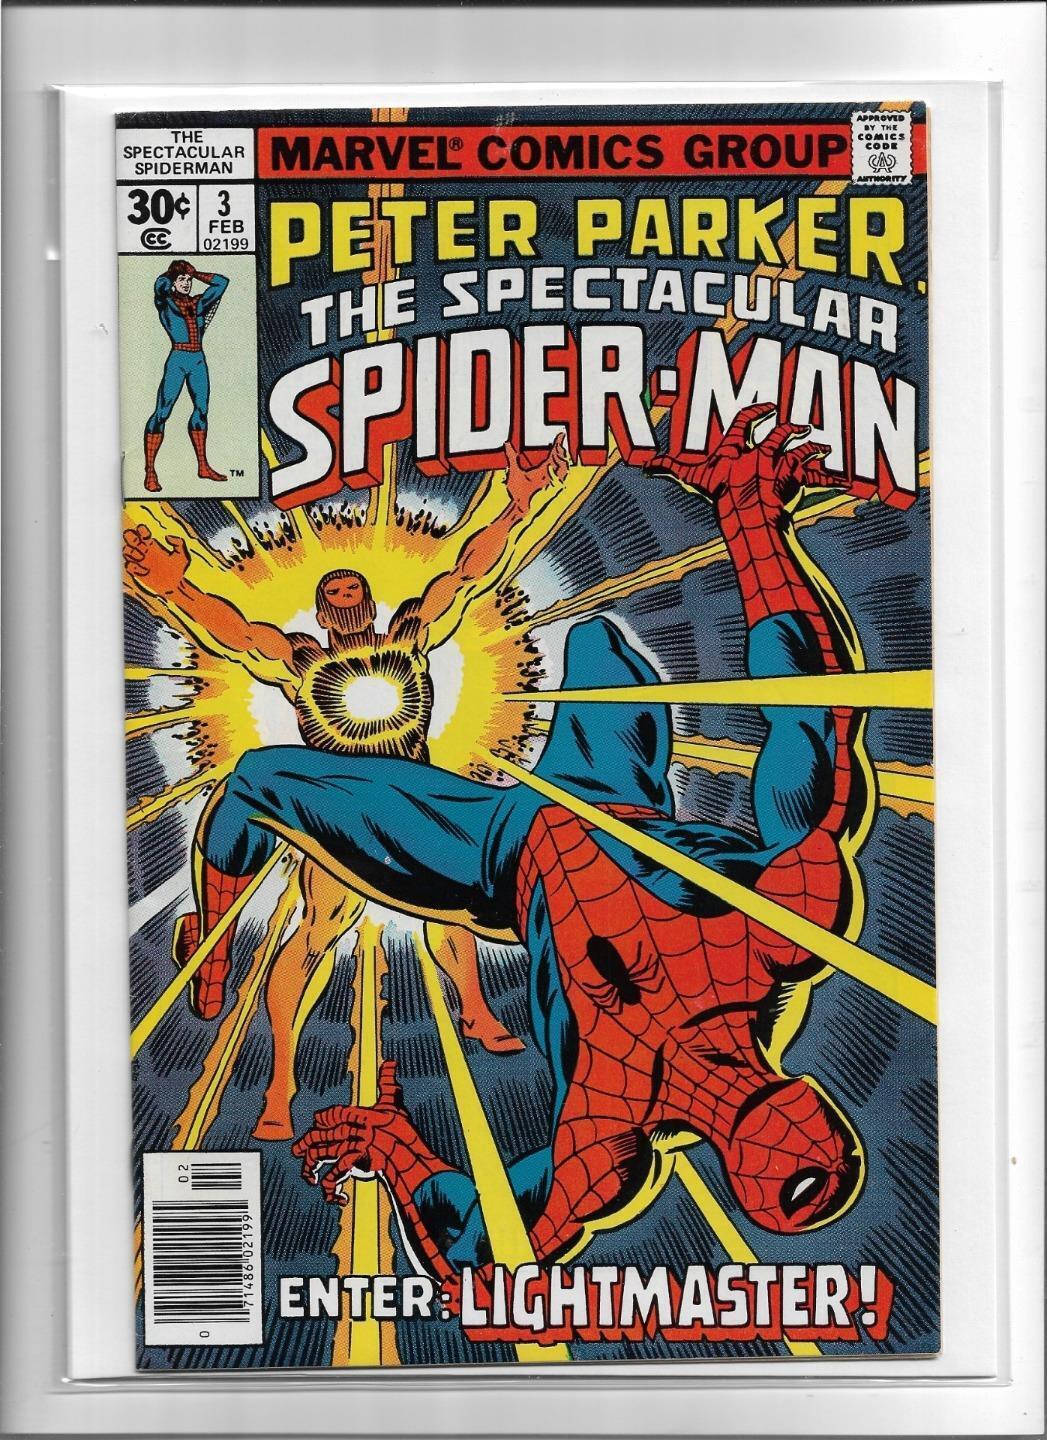 THE SPECTACULAR SPIDER-MAN #3 1977 VERY FINE+ 8.5 3163 LIGHTMASTER